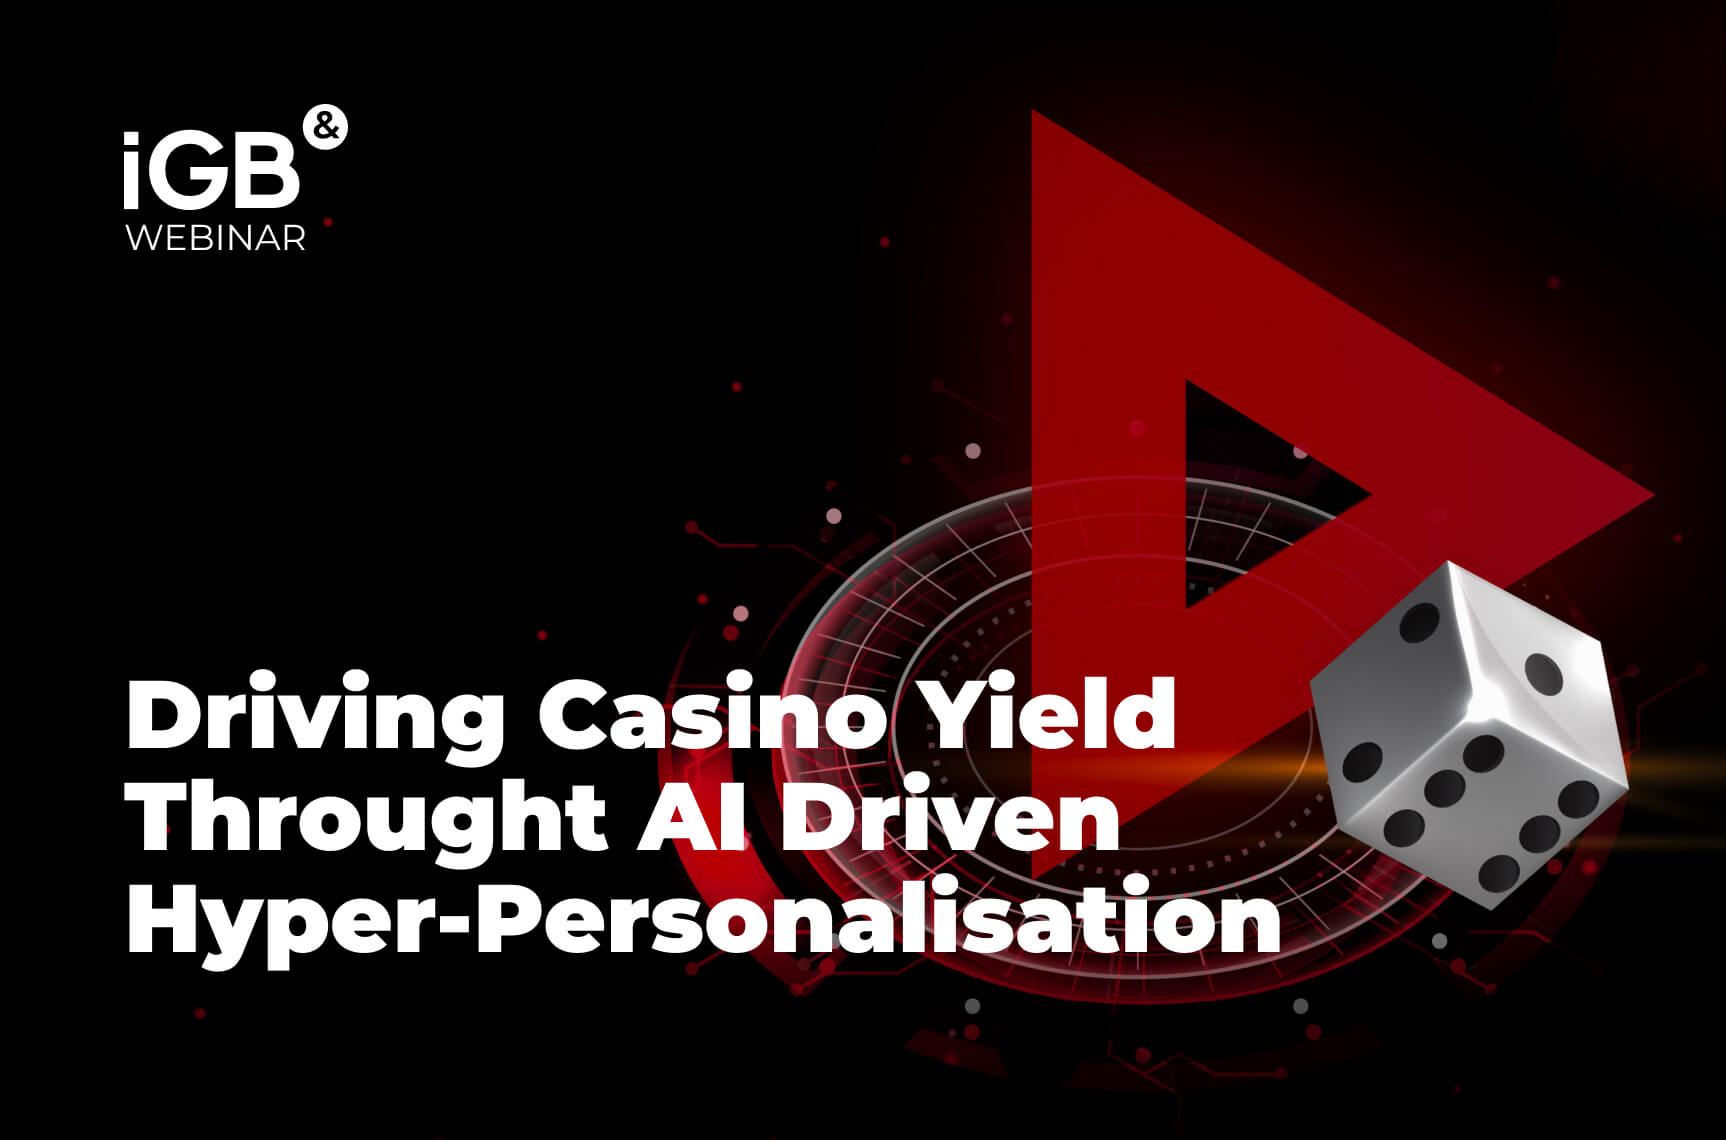 IGaming Business Webinar on Driving Casino Yield With AI Technologies